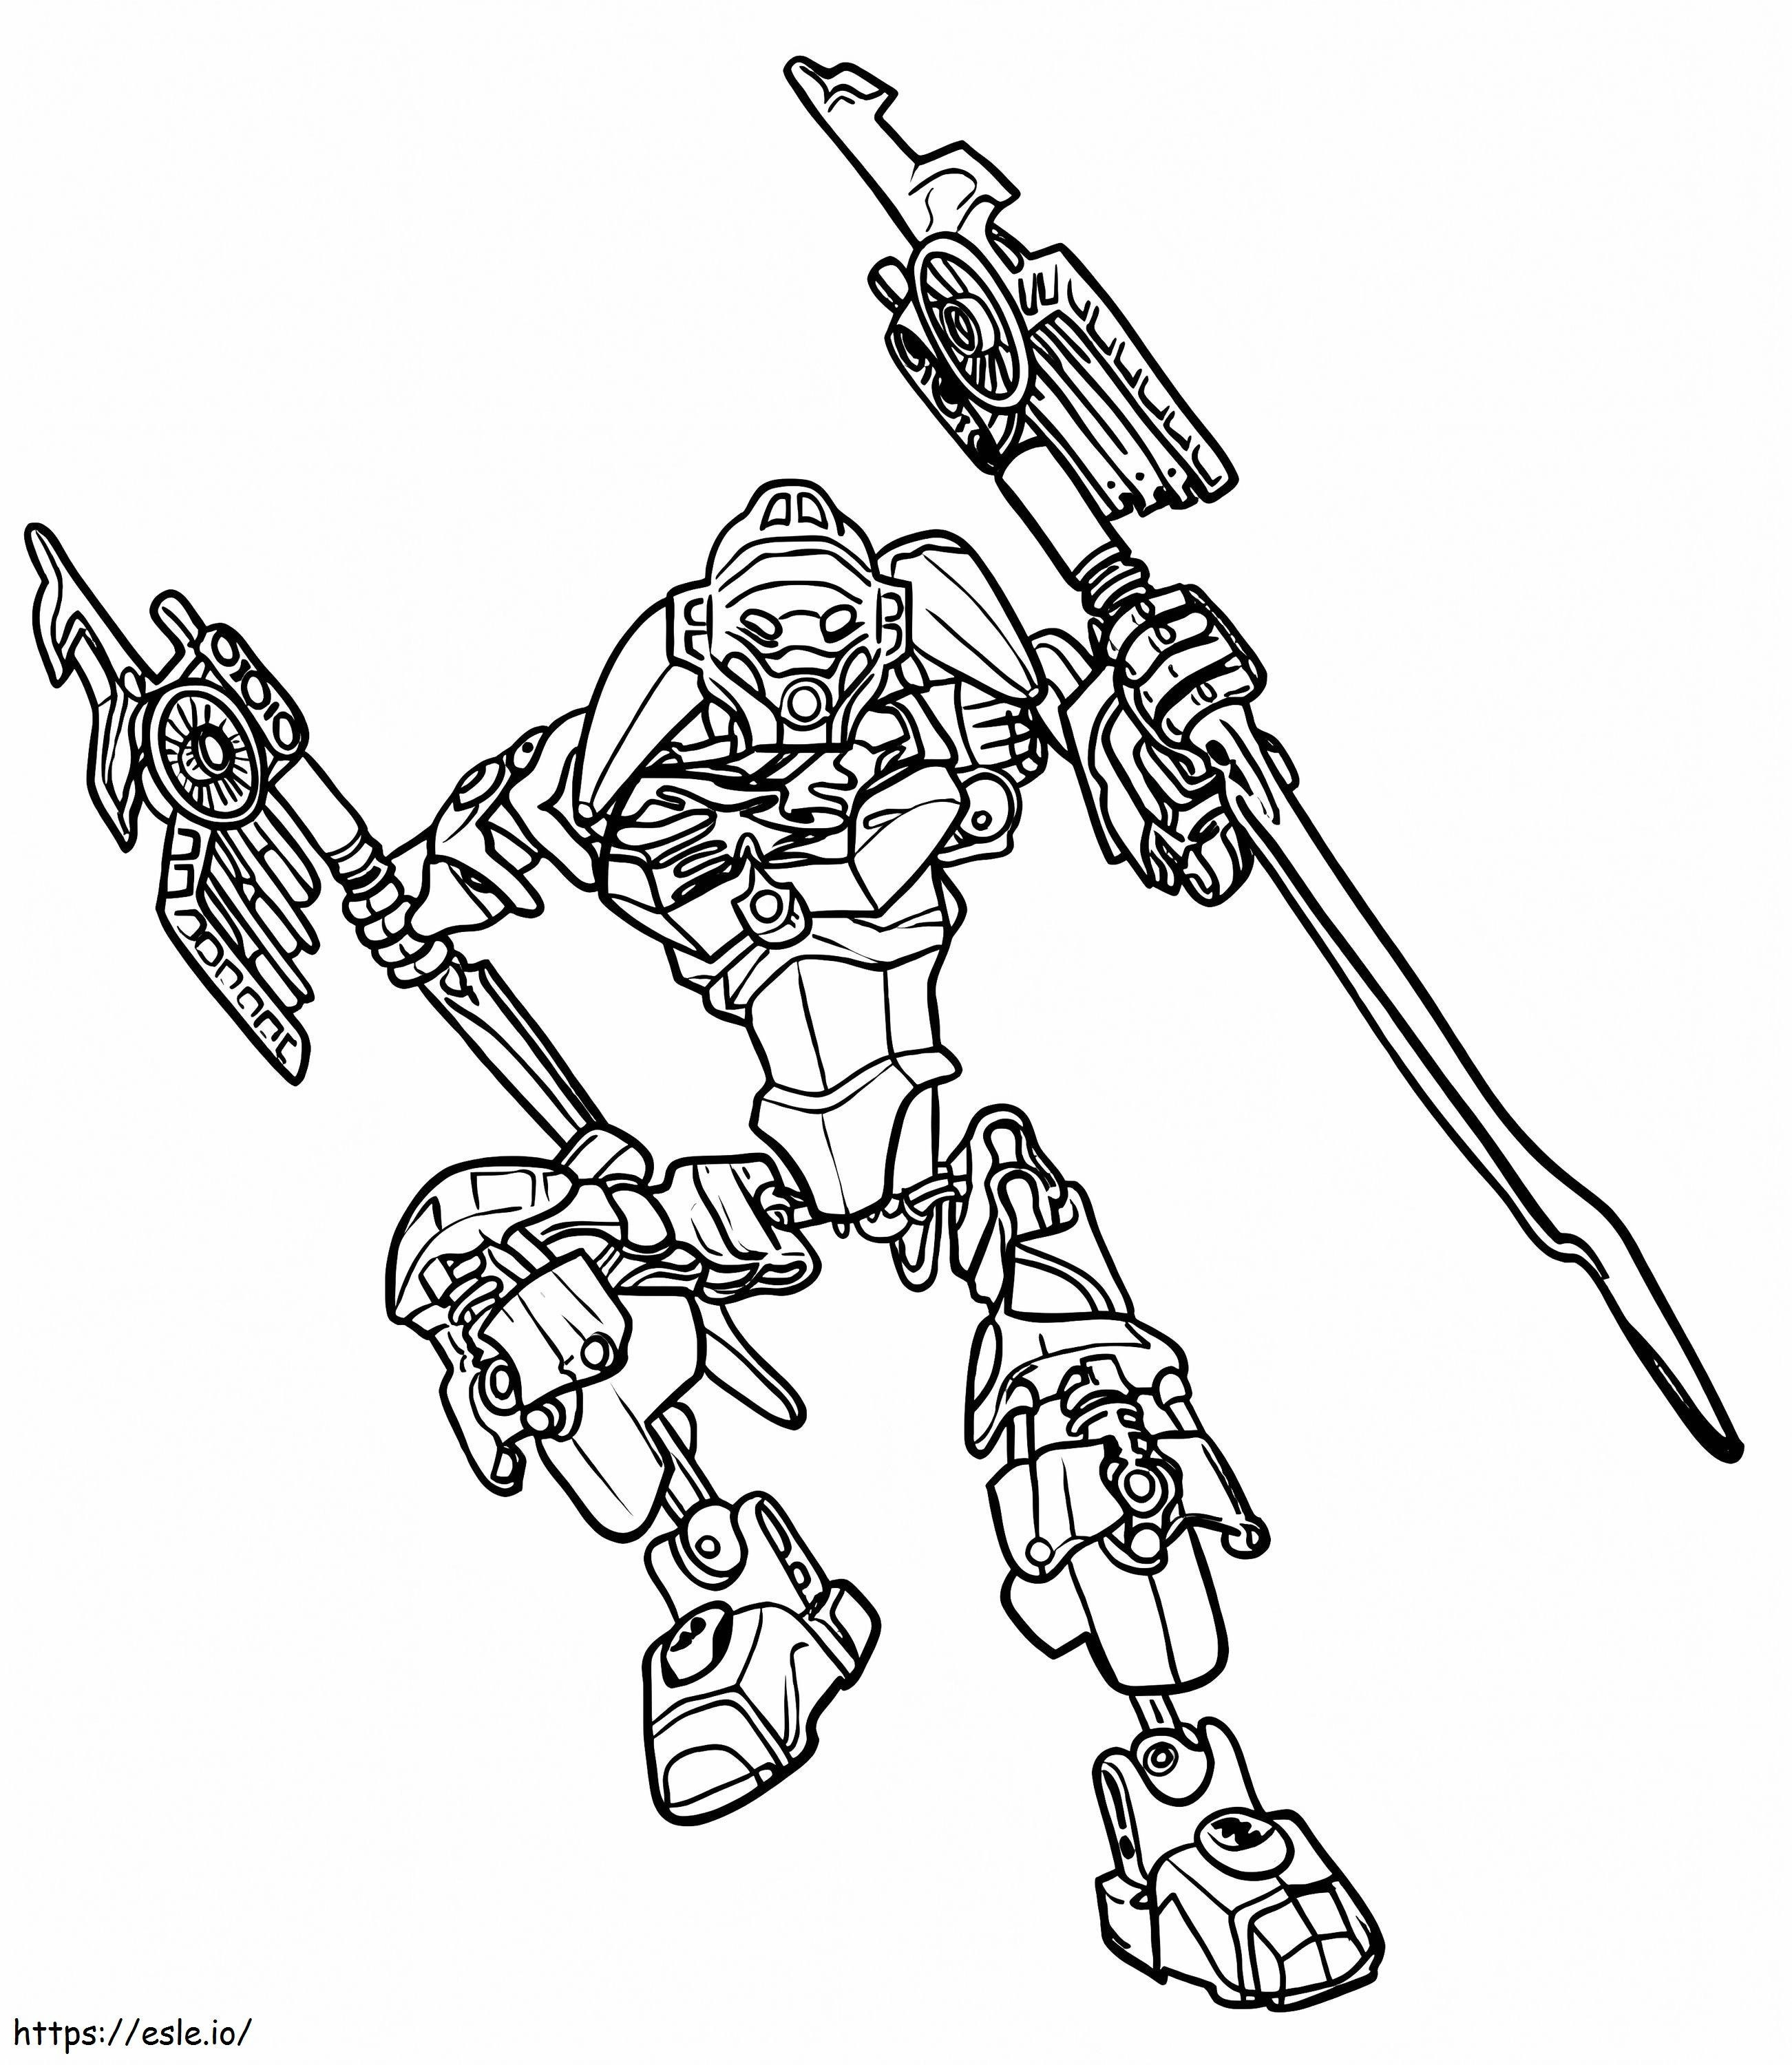 Left Bionicle coloring page